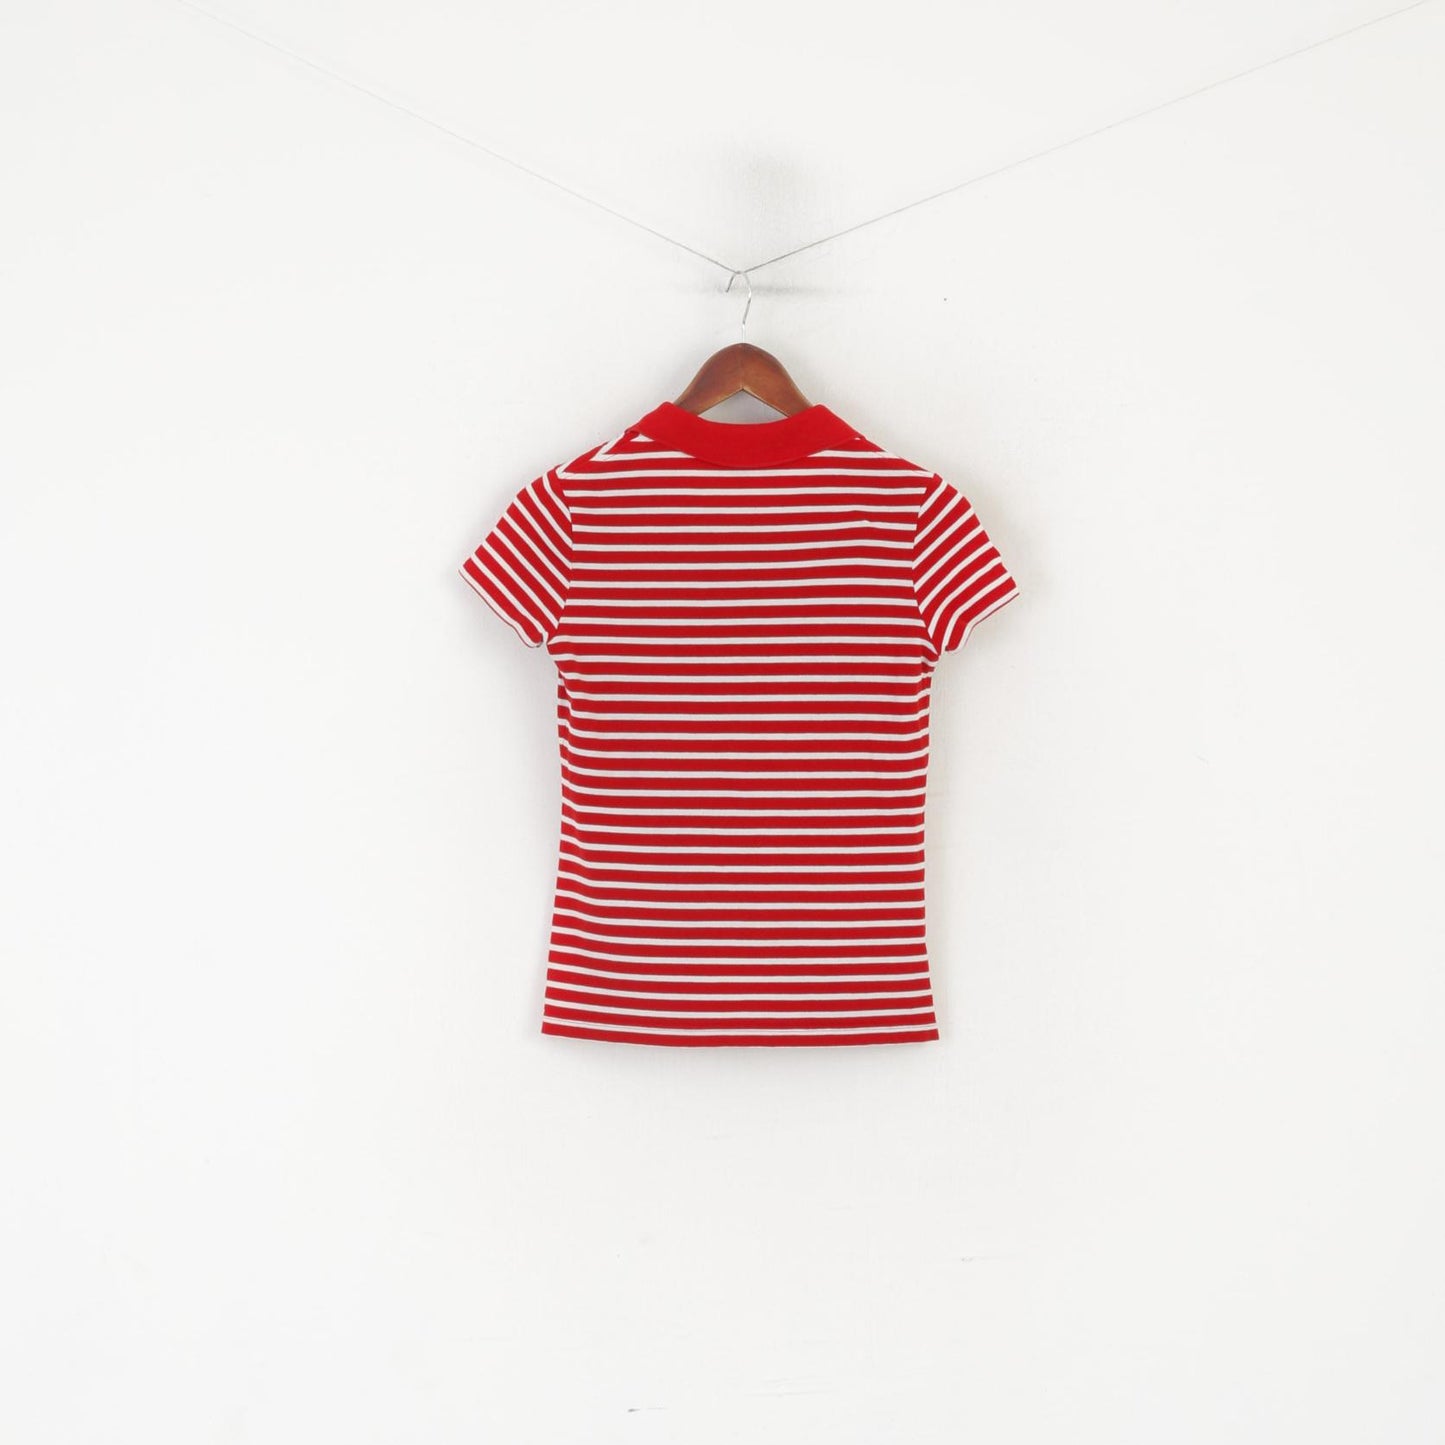 Lacoste Women 36 S Polo Shirt Red Cotton Striped Stretch Sport Top